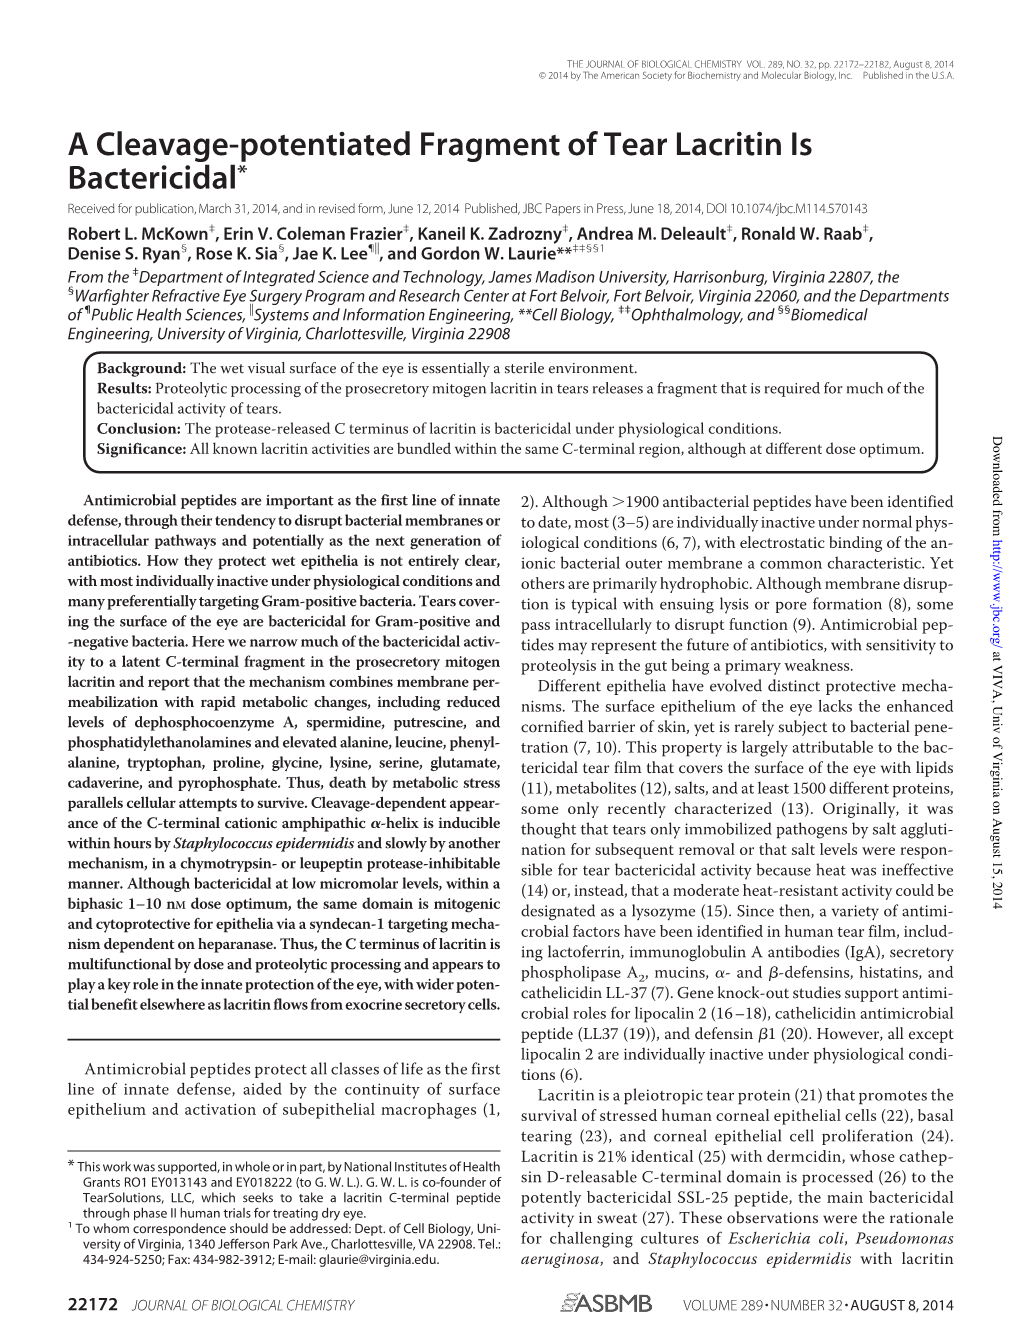 A Cleavage-Potentiated Fragment of Tear Lacritin Is Bactericidal*